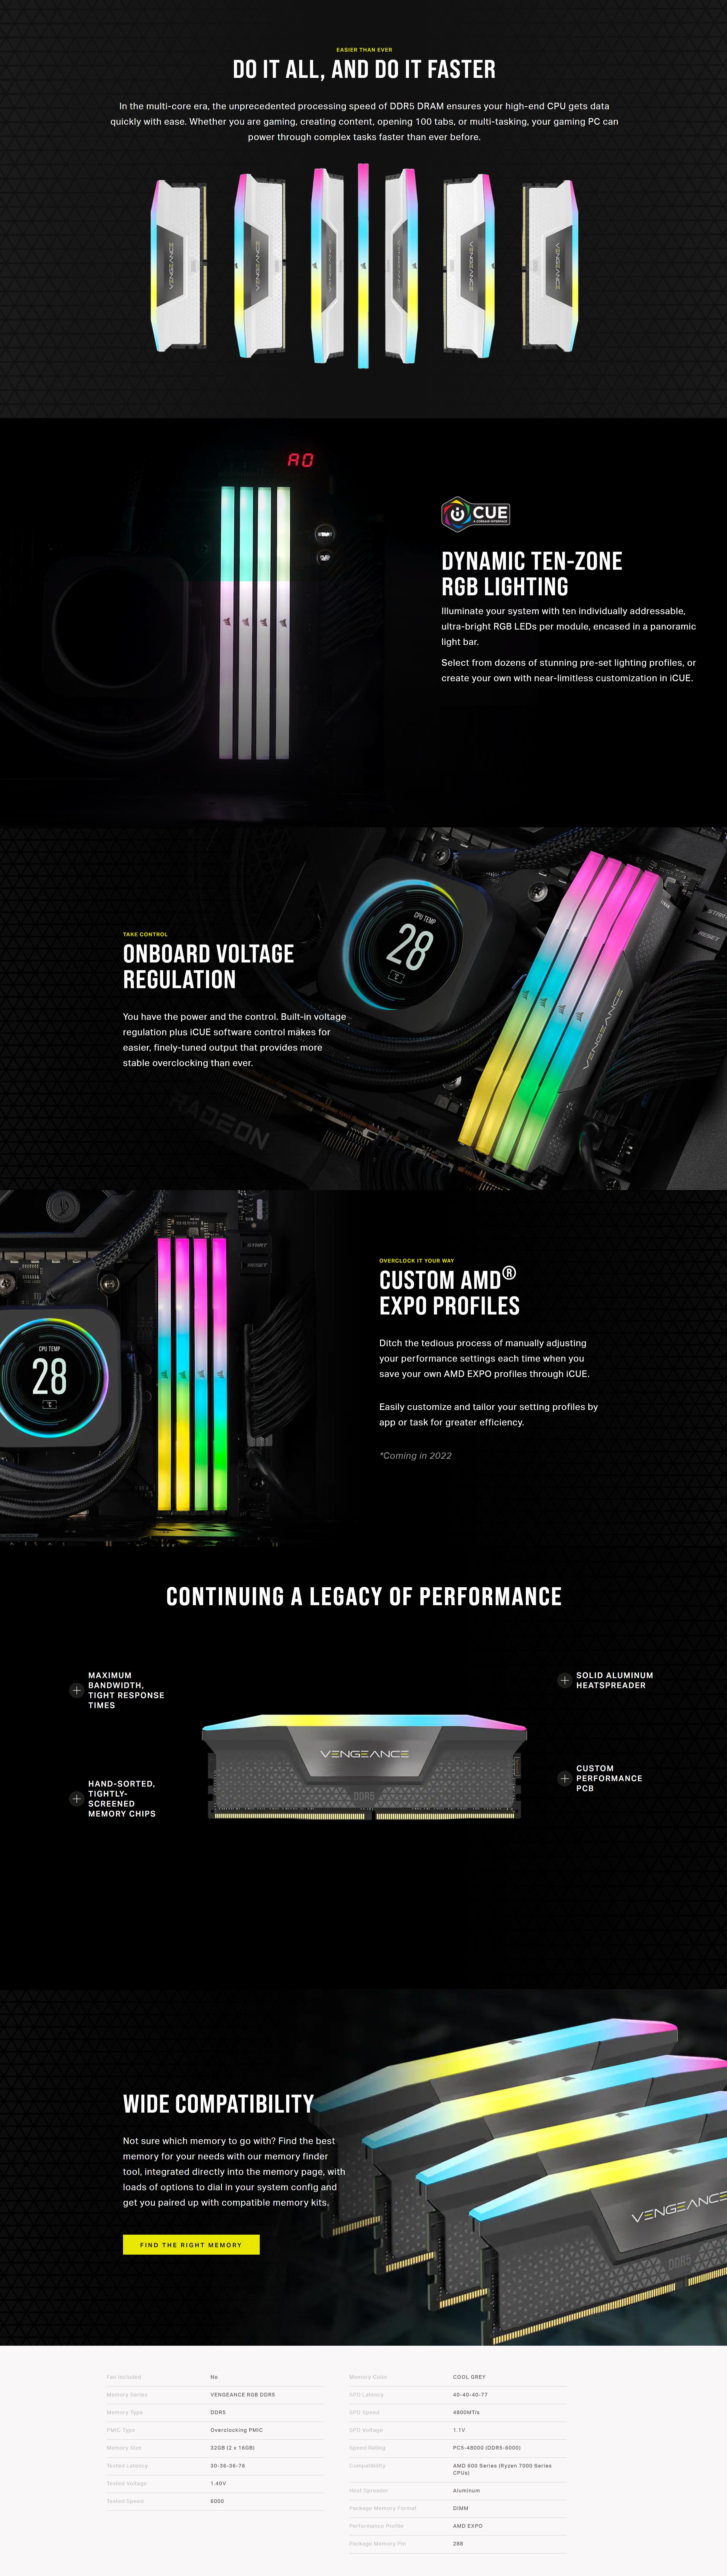 A large marketing image providing additional information about the product Corsair 32GB Kit (2x16GB) DDR5 Vengeance RGB AMD EXPO C30 6000MT/s - Cool Grey - Additional alt info not provided